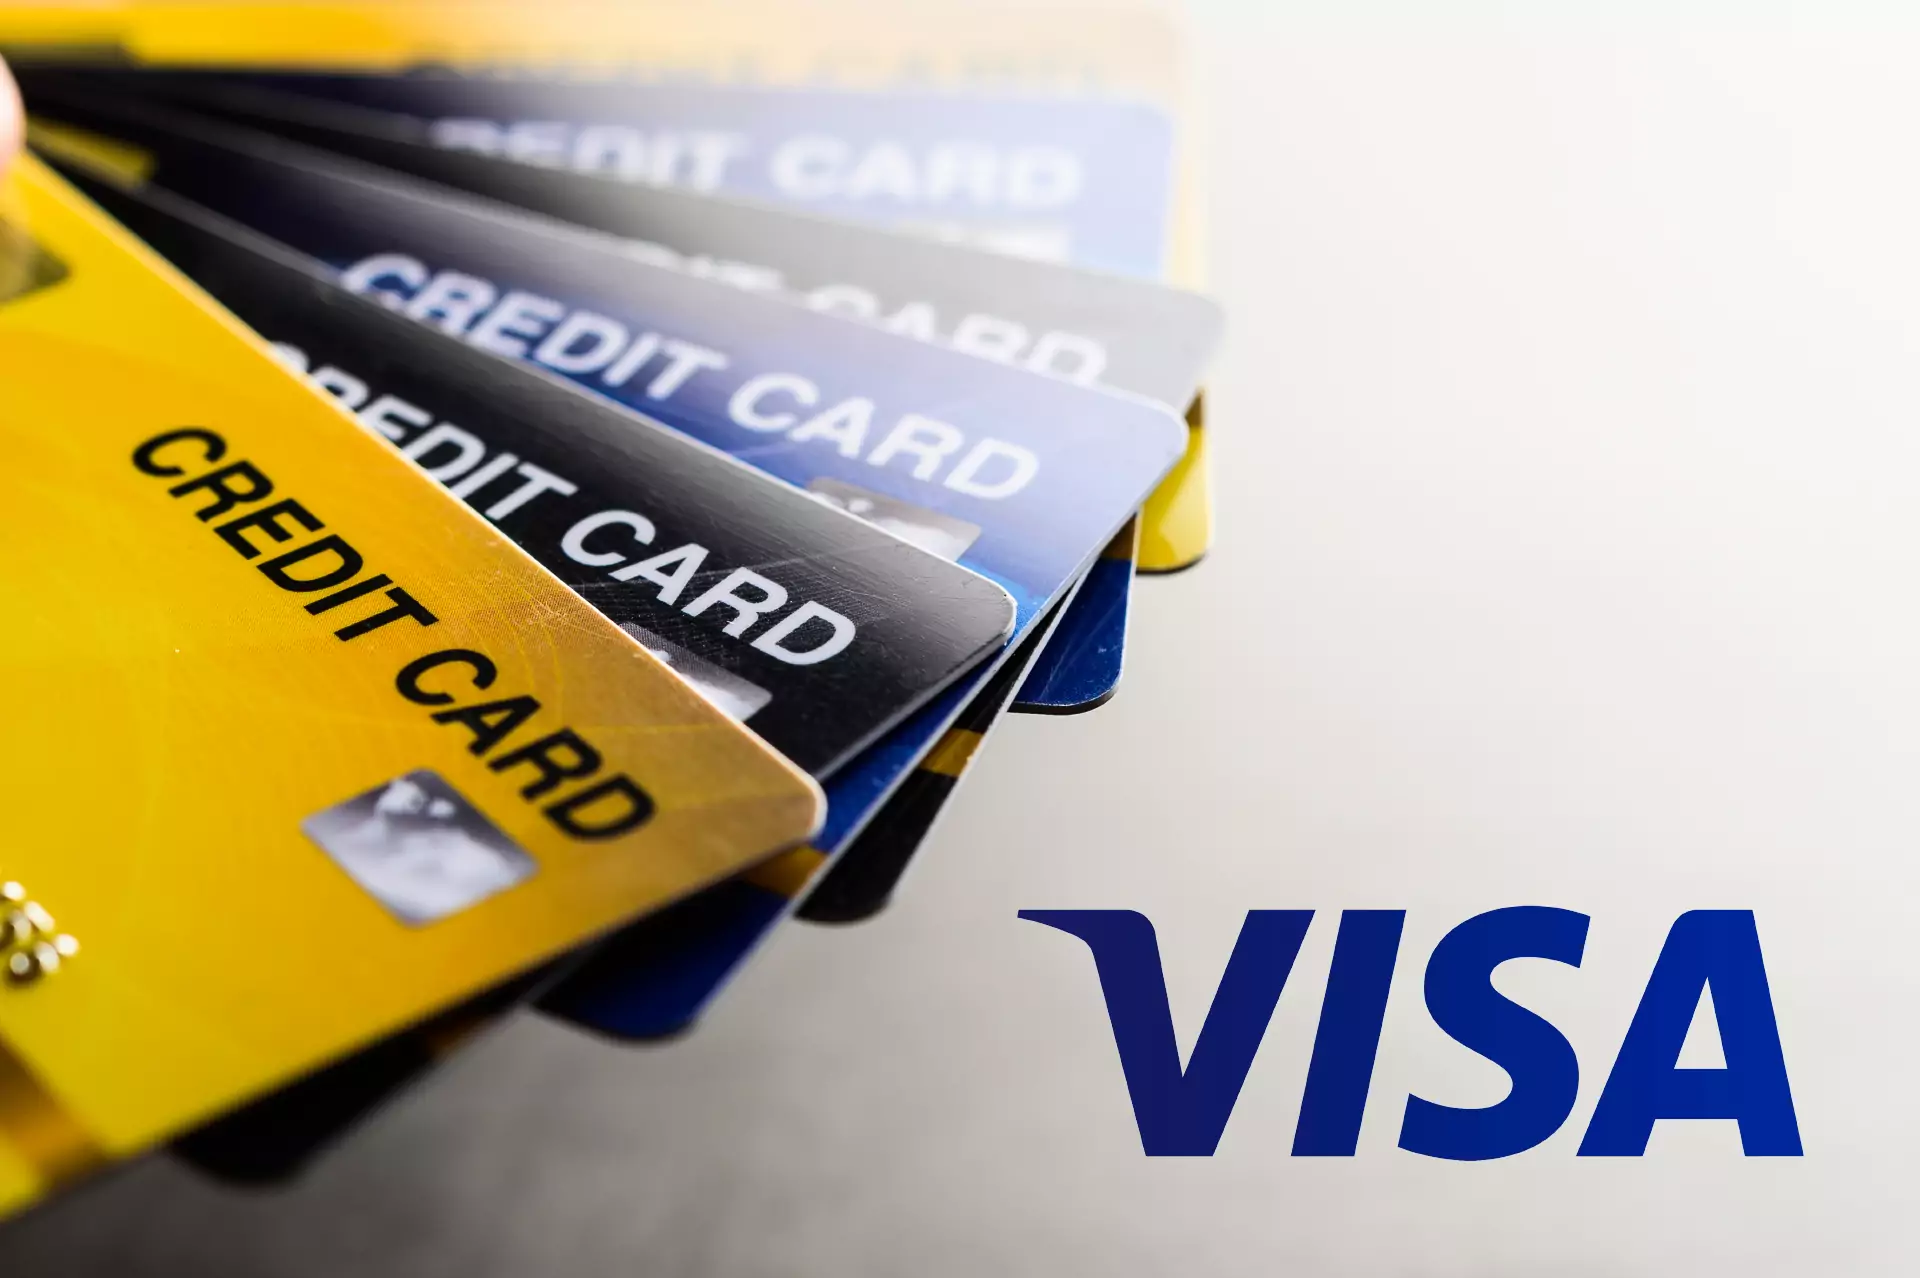 Visa is an international payment system that simplifies transactions between banks from all over the world.